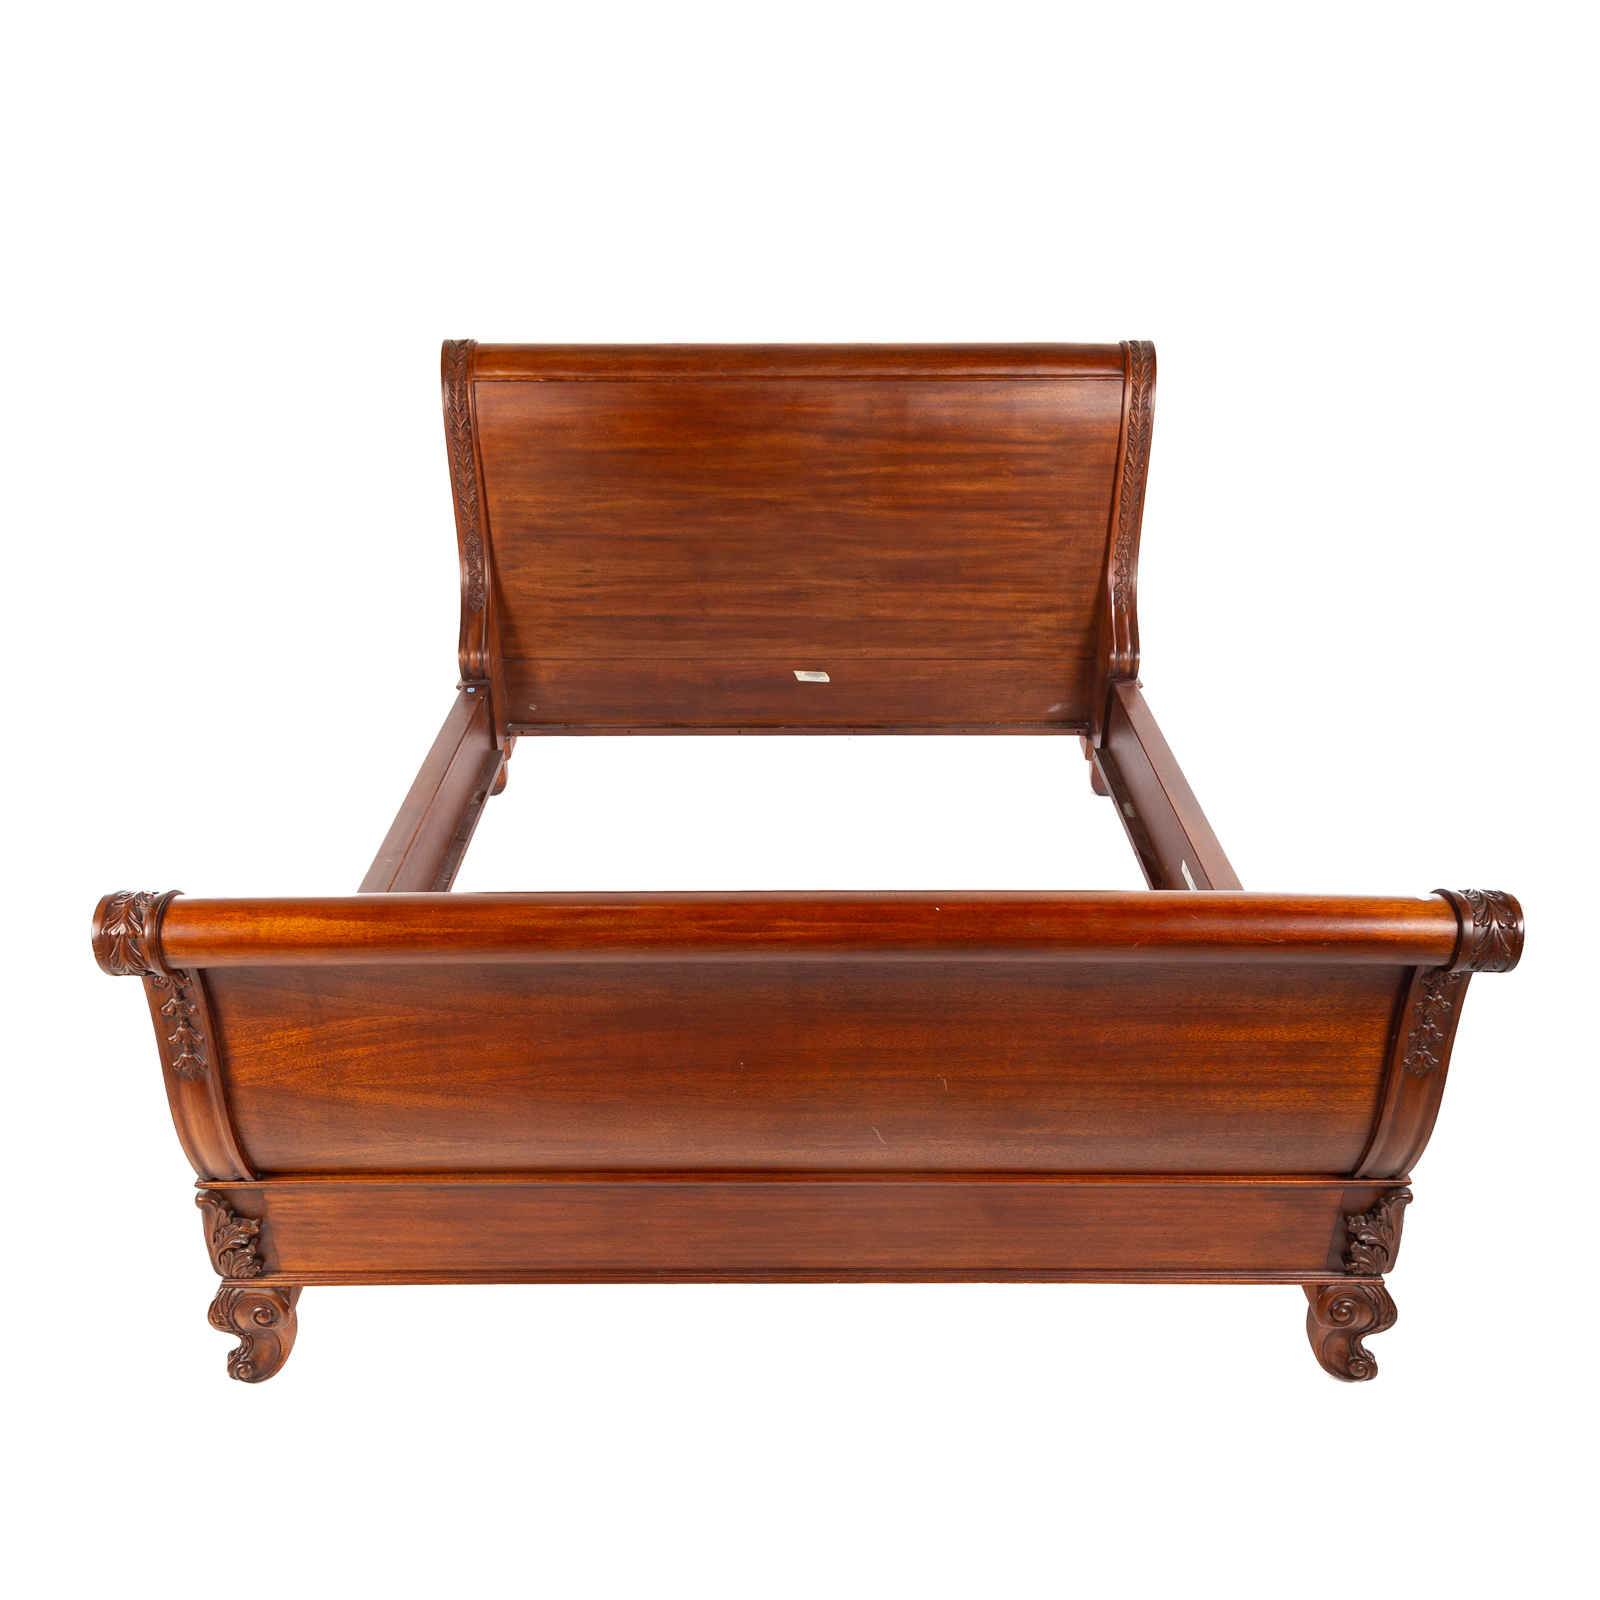 QUEEN SIZE MAHOGANY CARVED SLEIGH 369969